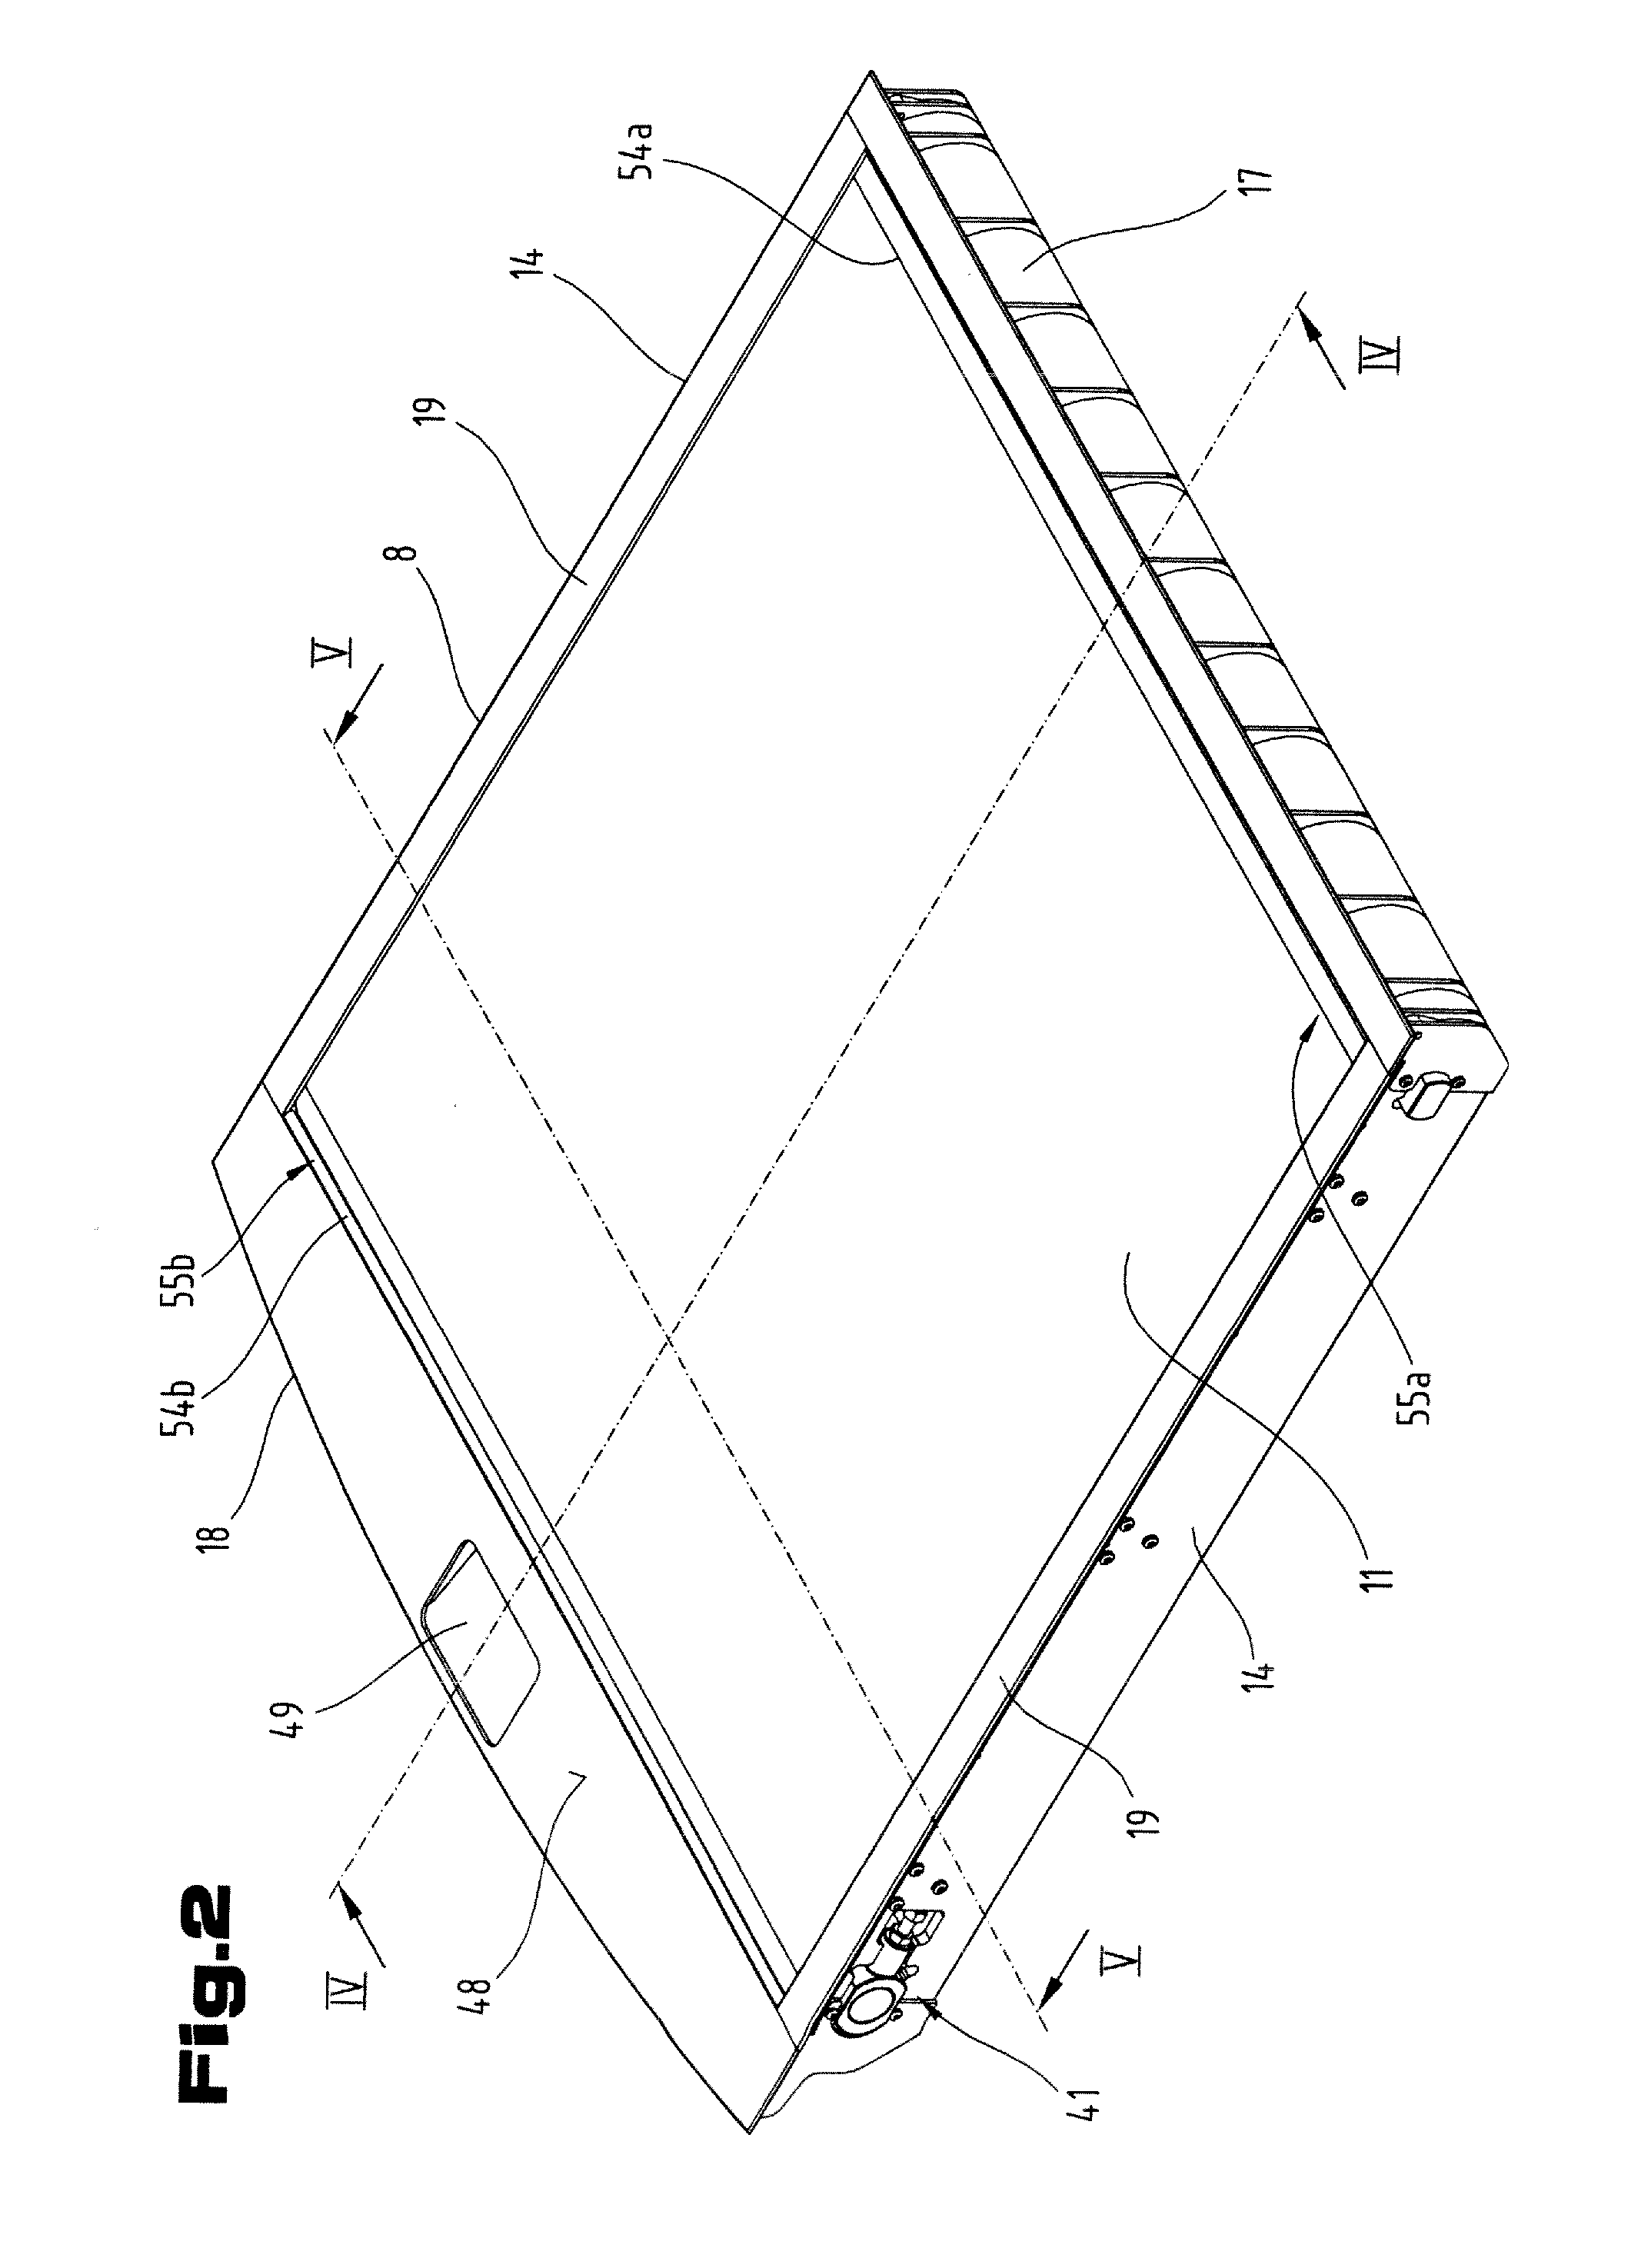 Loading Compartment Floor for a Loading Compartment of a Motor Vehicle